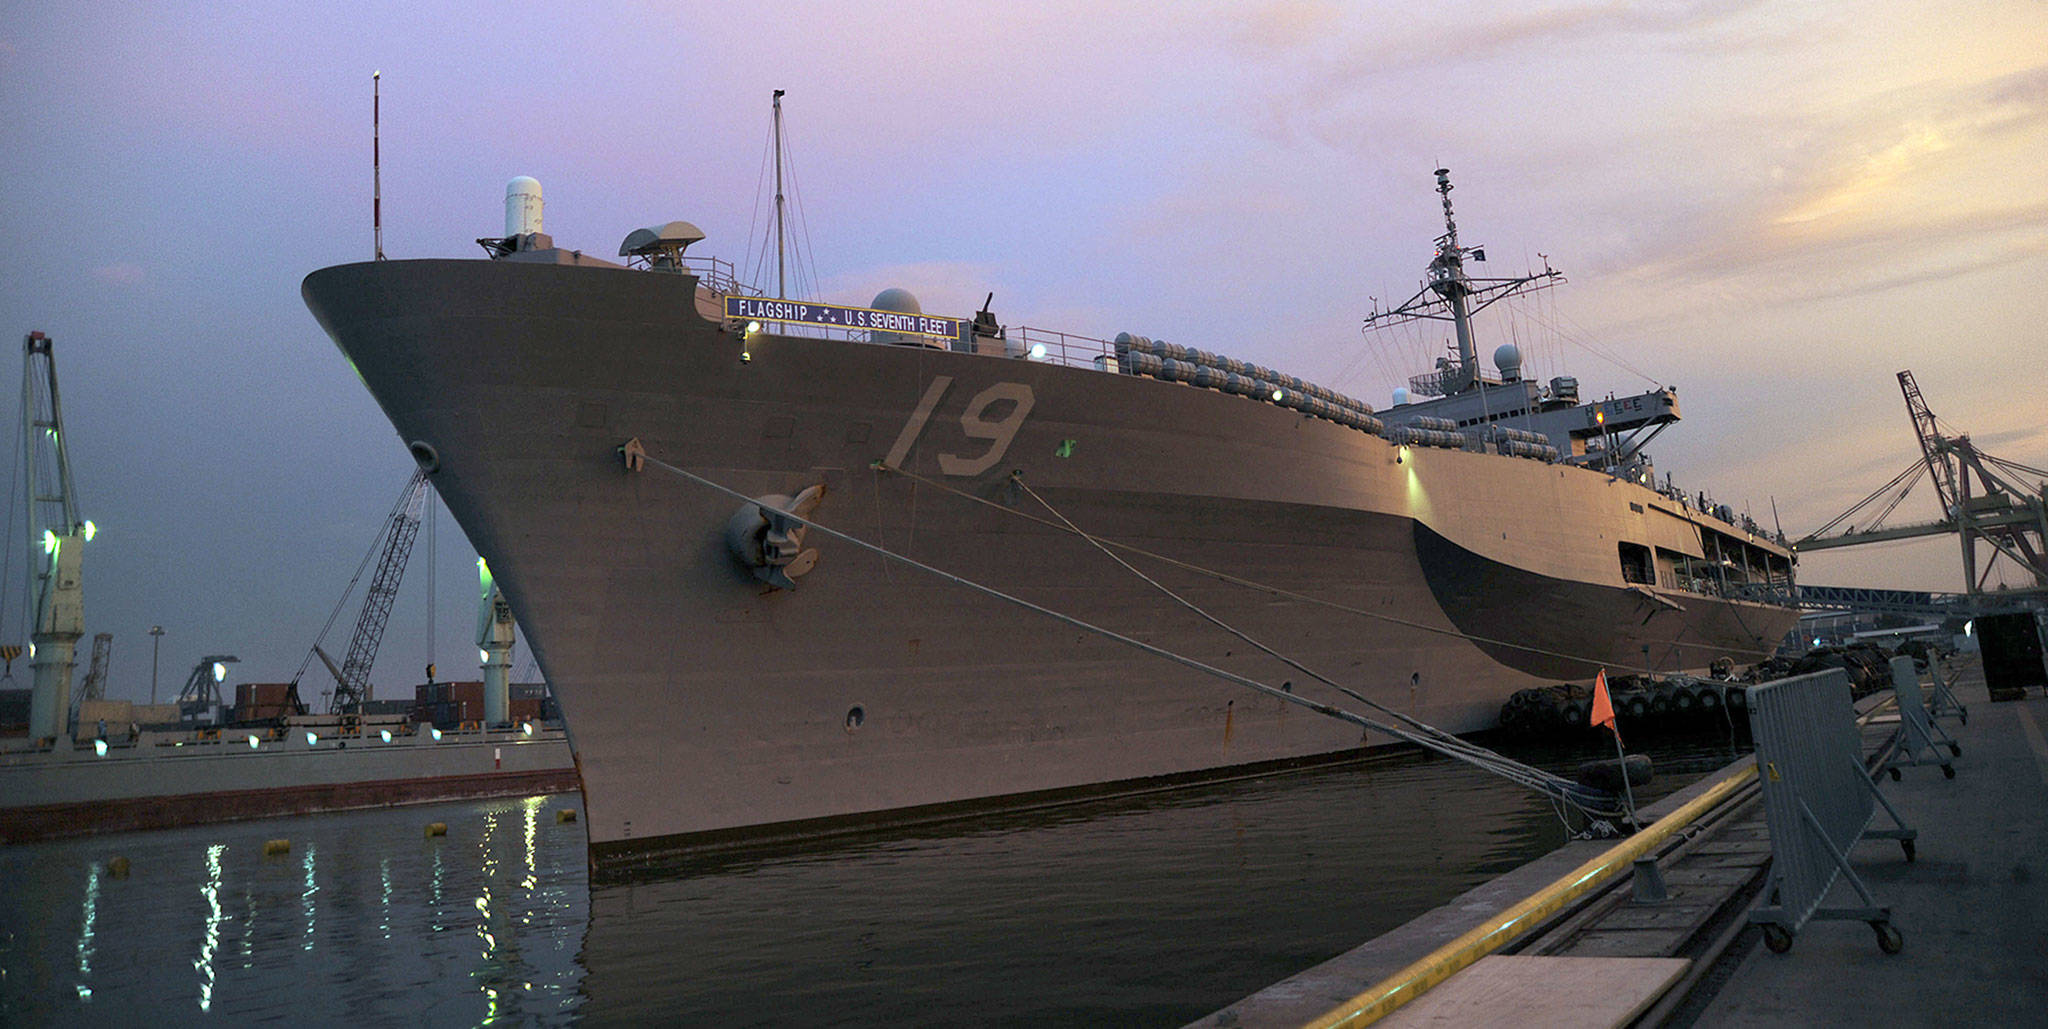 The USS Blue Ridge, flagship of the 7th Fleet, during a port visit in Jakarta, Indonesia, in 2010. (U.S. Navy)